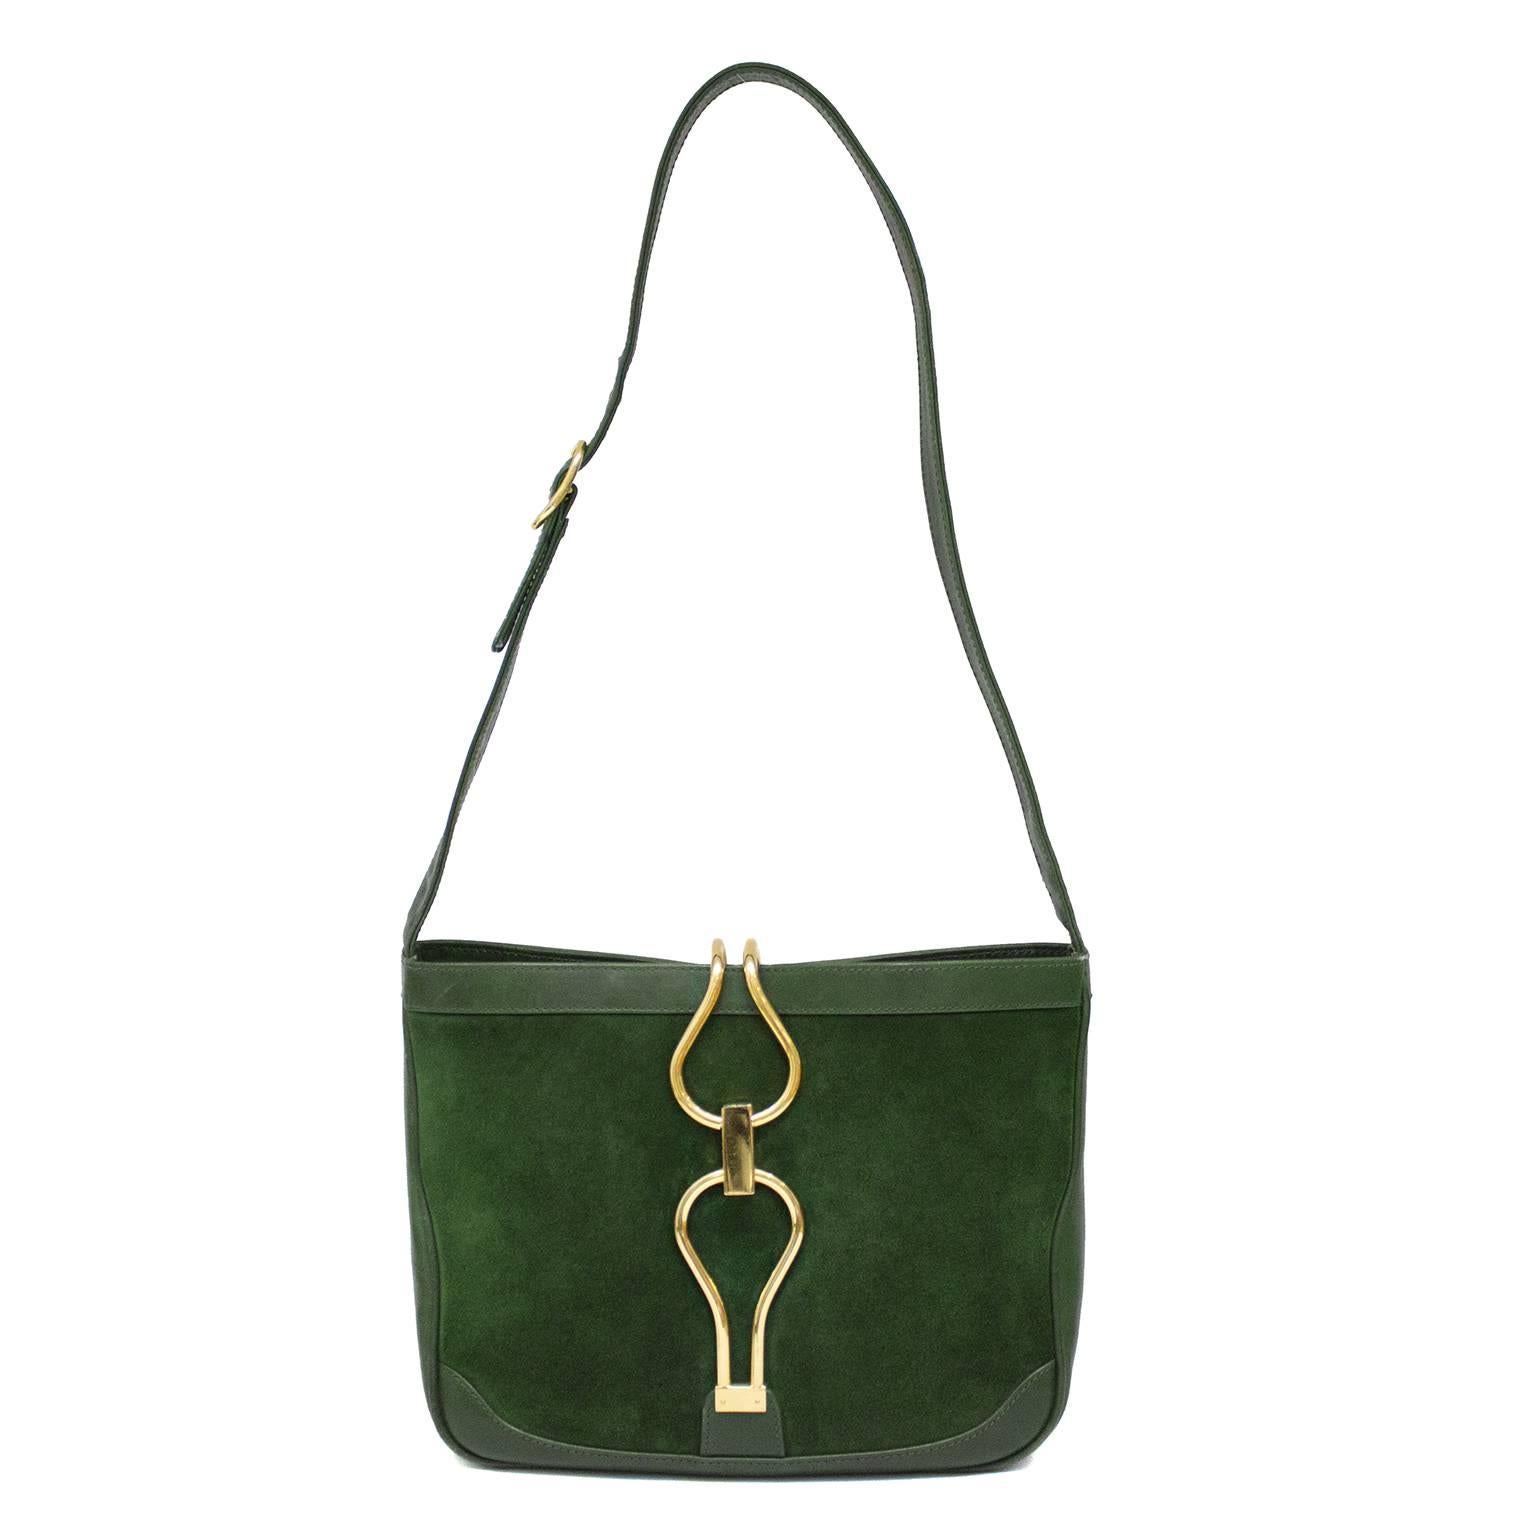 Uber chic 1970s Jackie O style Gucci shoulder bag. Hunter green suede with matching green leather trim. Gold hardware has very slight surface scratches. Cream leather interior, with one interior pocket with white zipper. Adjustable shoulder strap.